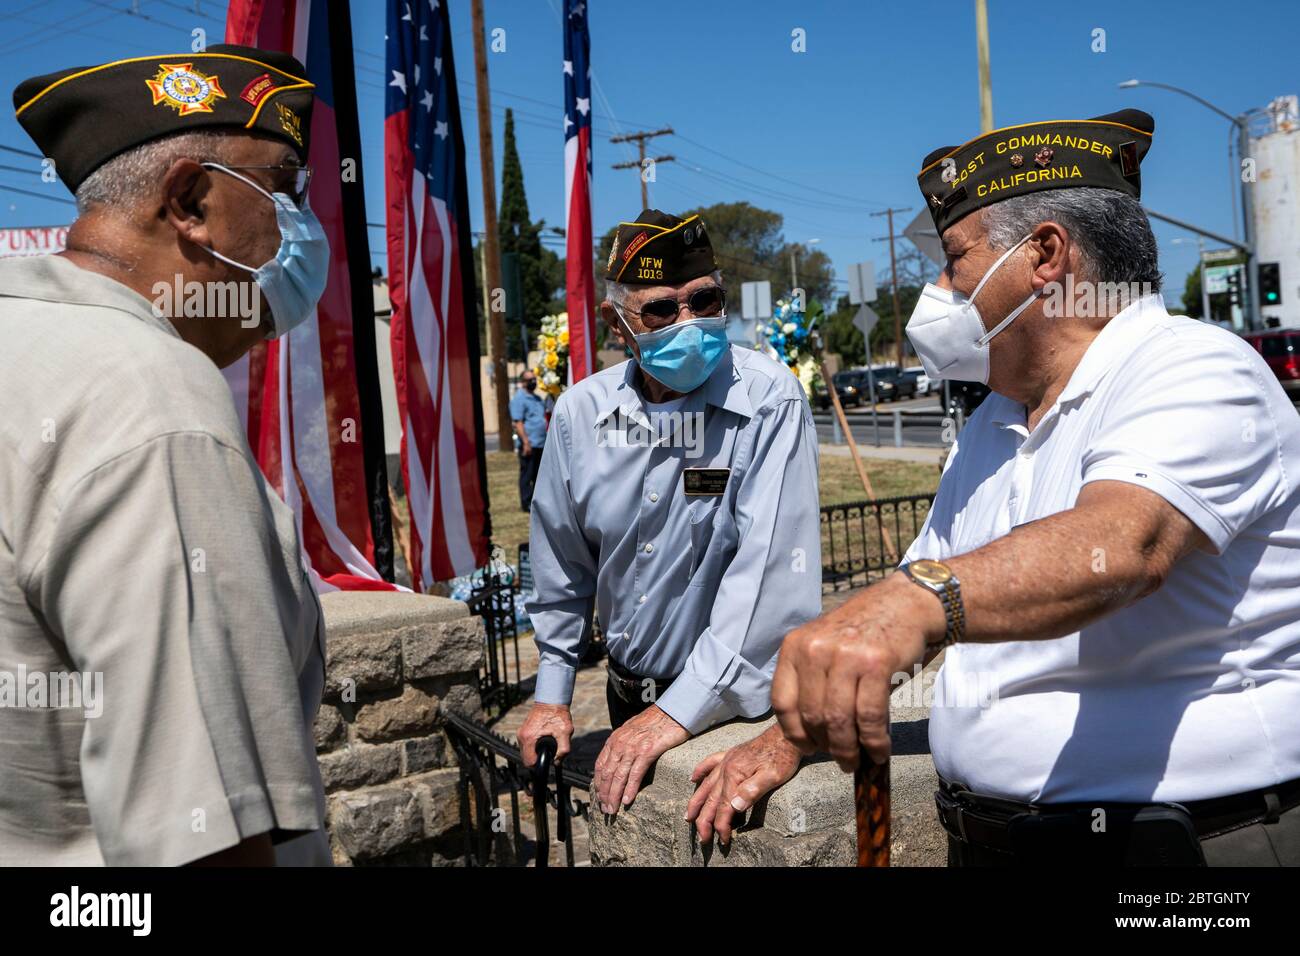 Veterans wearing face masks as a preventive measure against the spread of COVID 19 pandemic attend a Memorial Day Ceremony in Los Angeles.The event took place at the Los Cinco Puntos/Five Points Memorial that honours Mexican American soldiers who died in the World War II, the Korean War, and the Vietnam War. Stock Photo